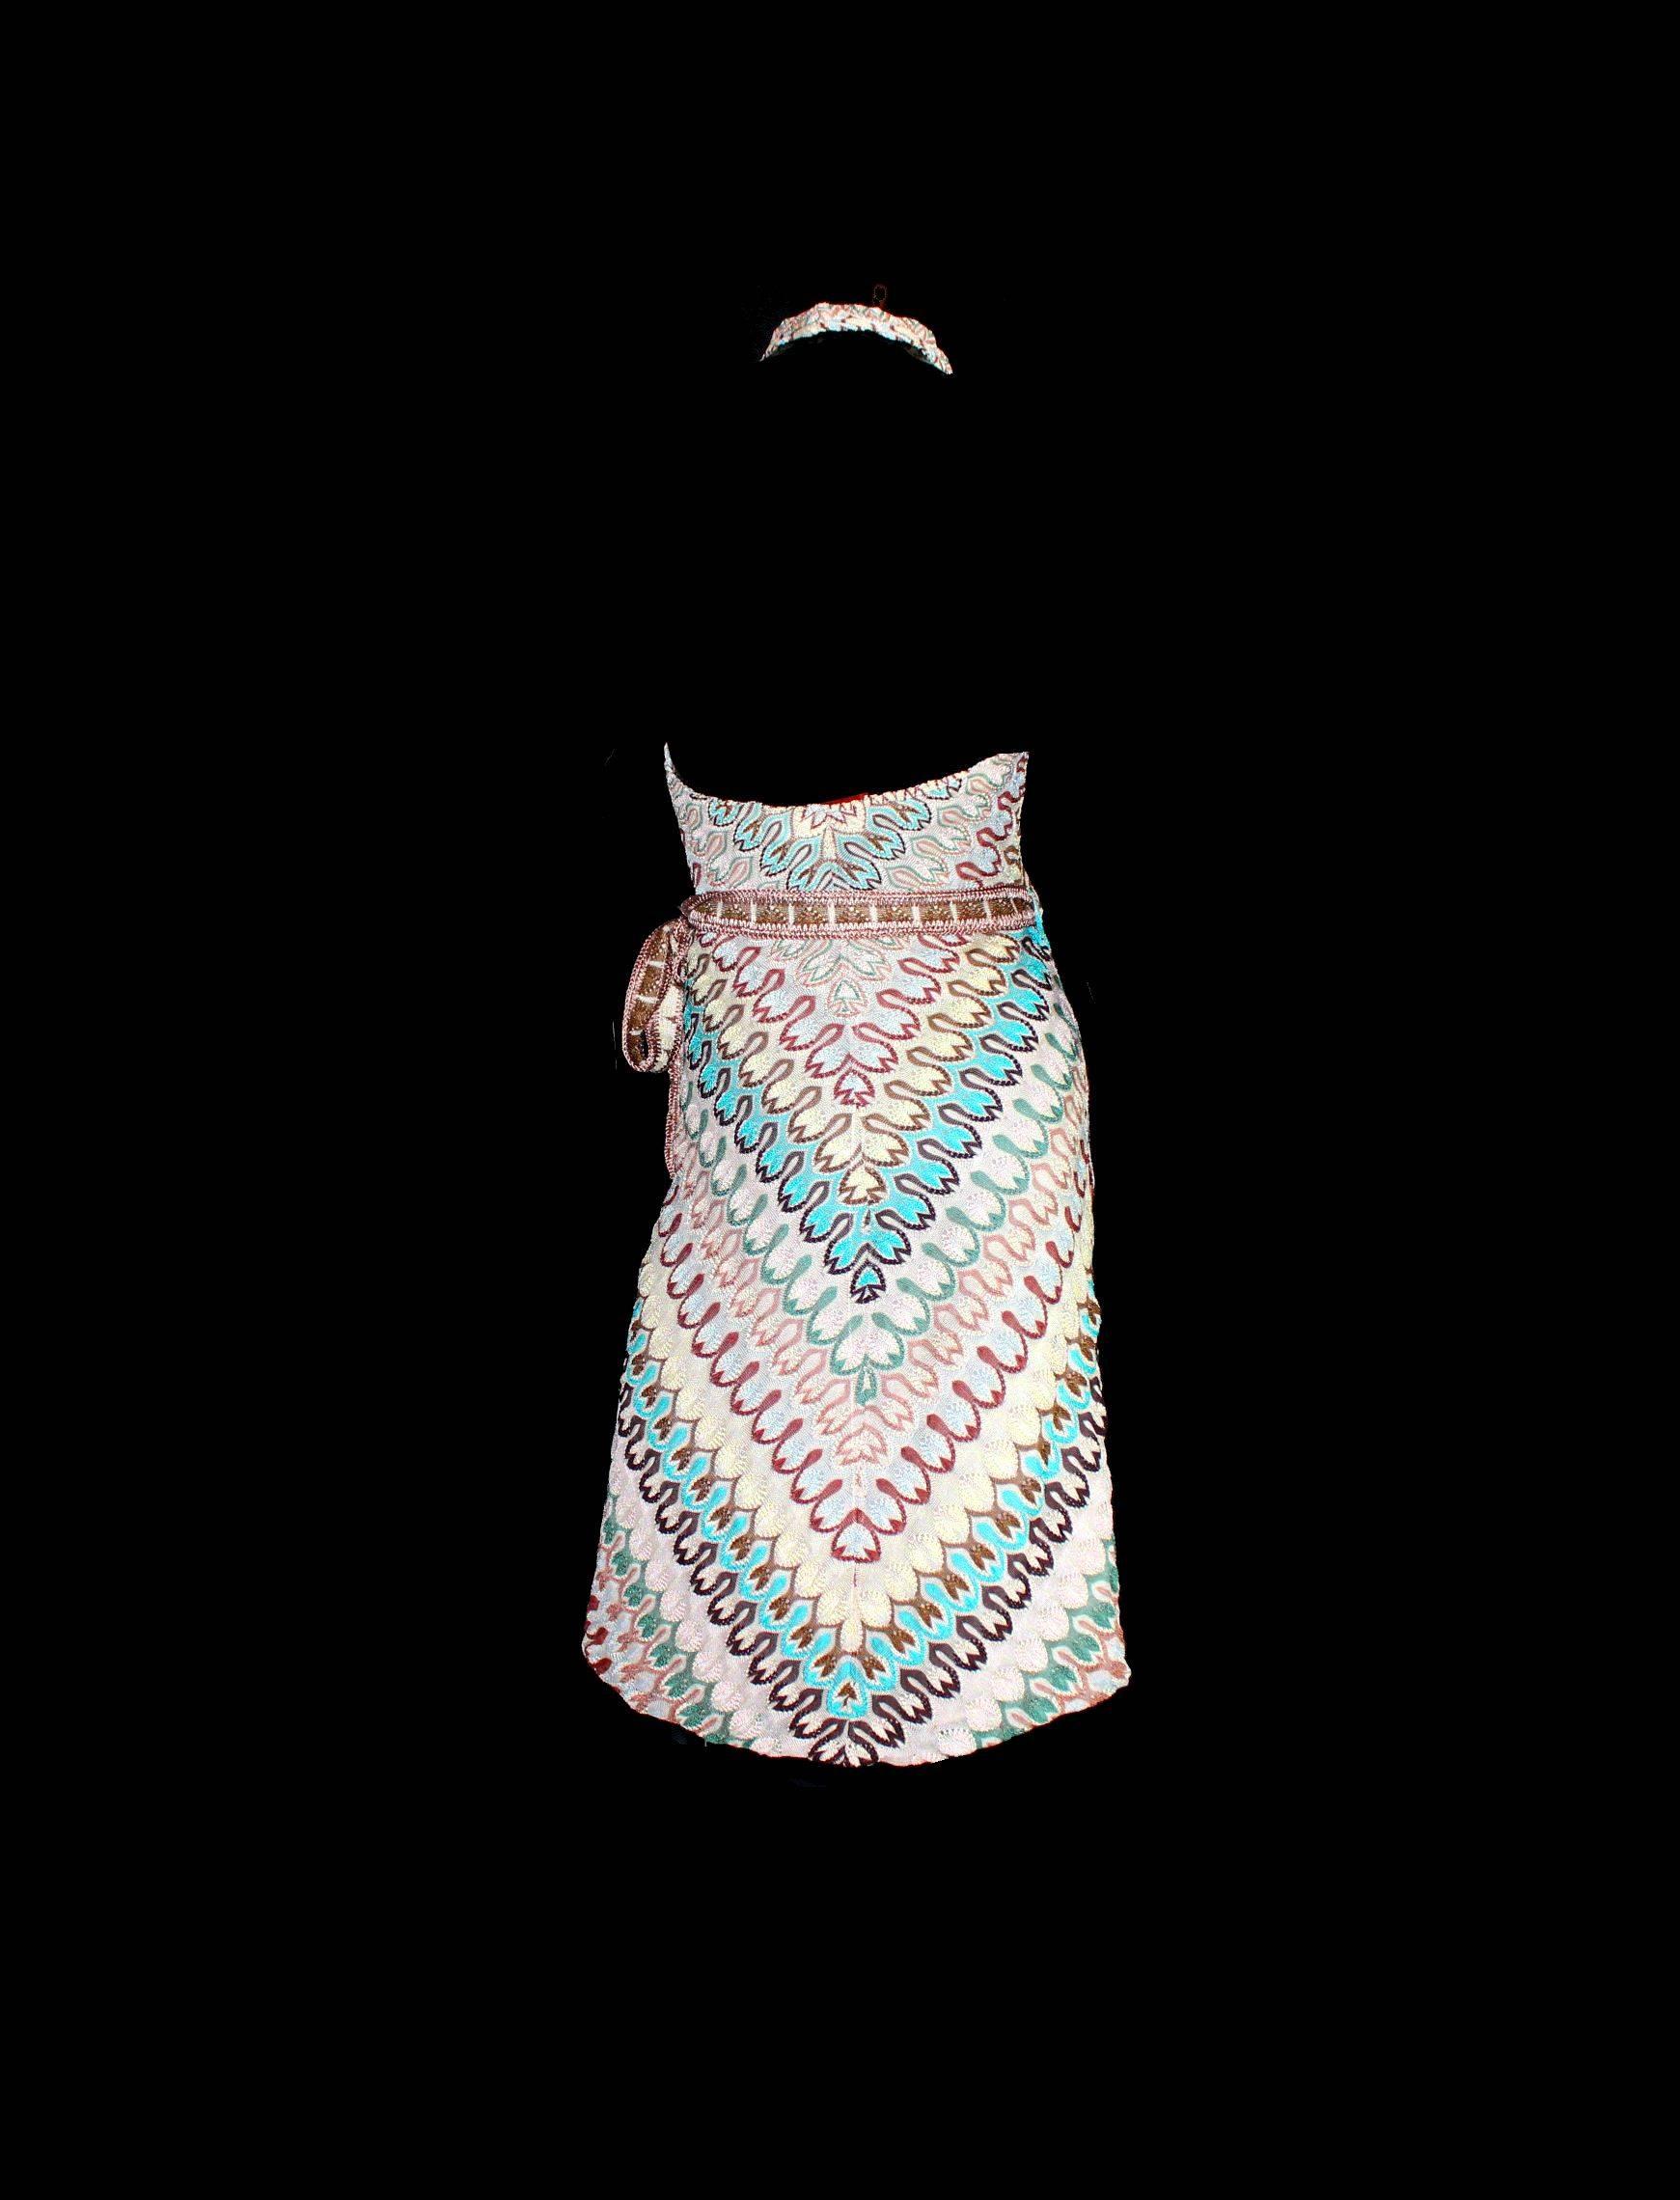 Beautiful multicolor shades
Classic MISSONI signature zigzag knit
Simply slips on
Wrap dress
Fully lined with nude silk
Dry Clean only
Made in Italy
Size 40

